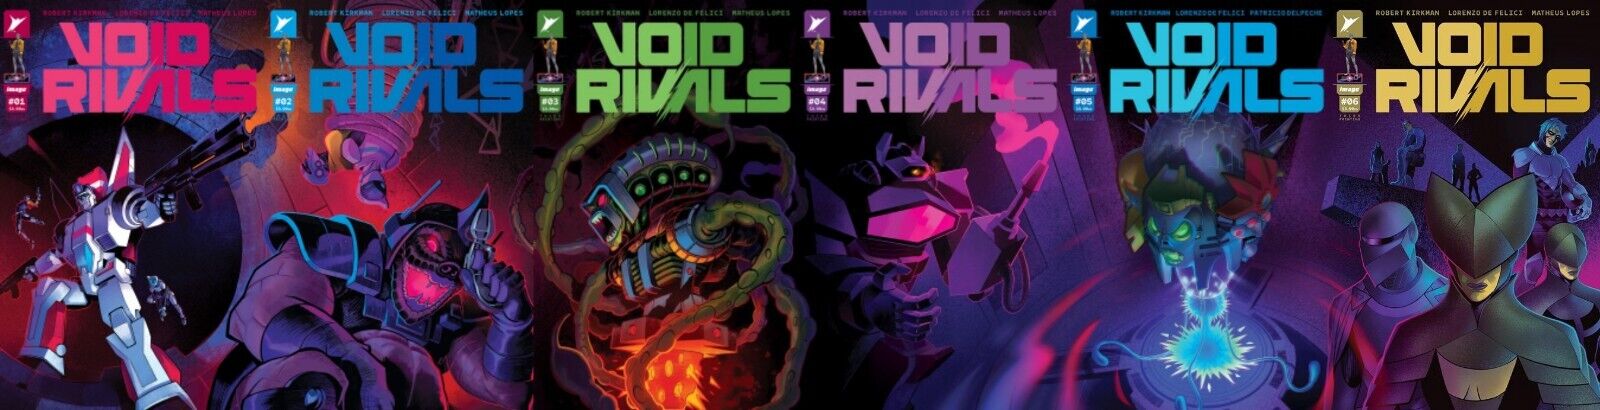 VOID RIVALS 1 2 3 4 5 6 NM FLAVIANO CONNECTING VARIANT FULL SET  